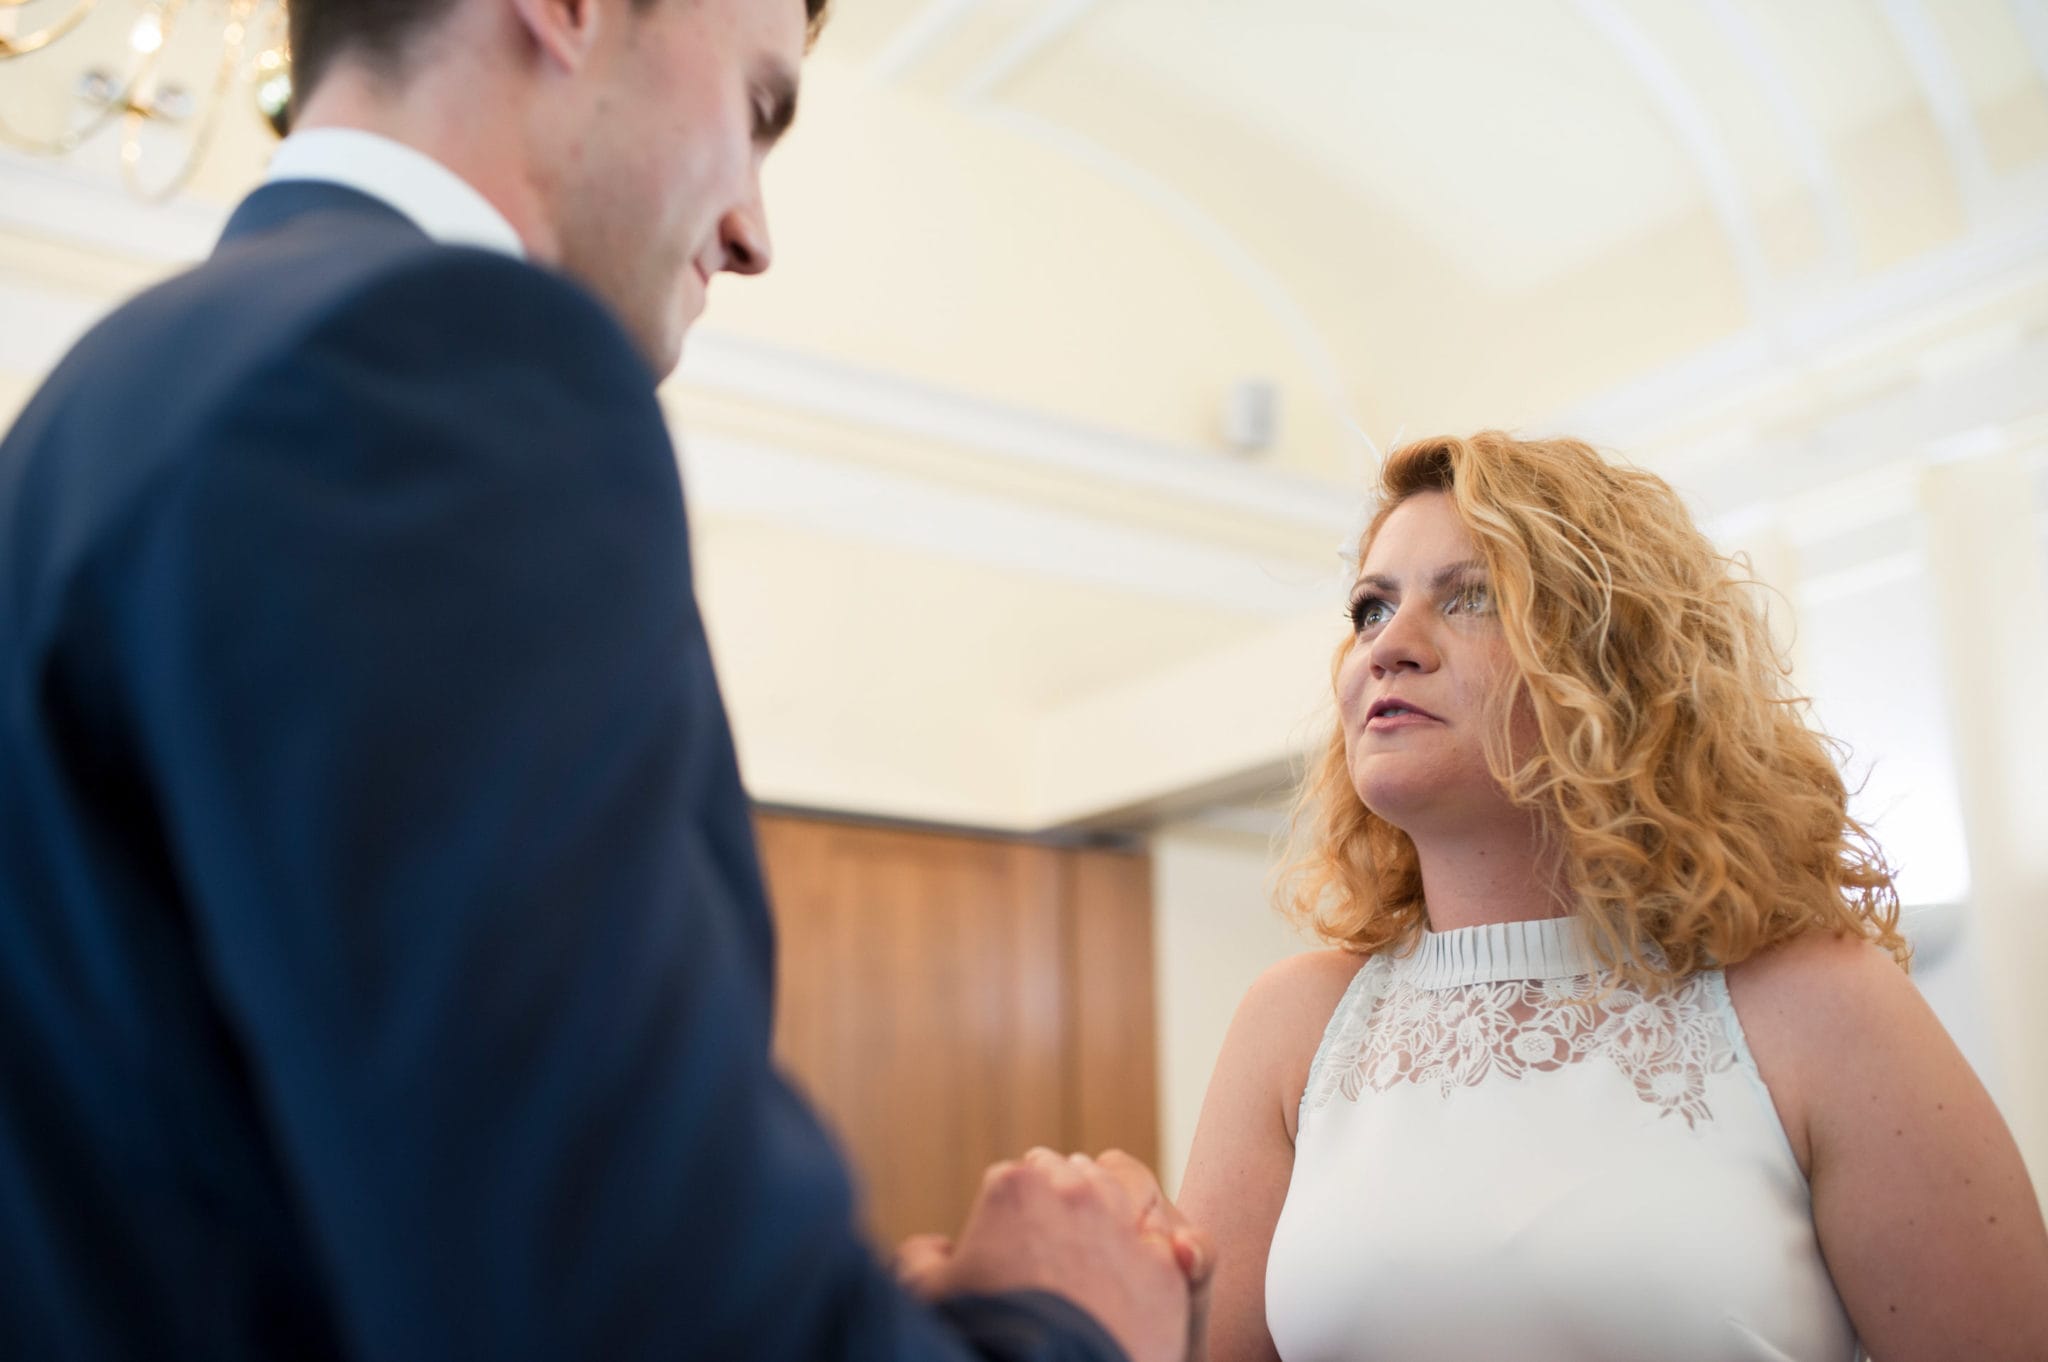 bride and groom Bromley on Bow Registry office, London UK Wedding photography ceremony room with the guest